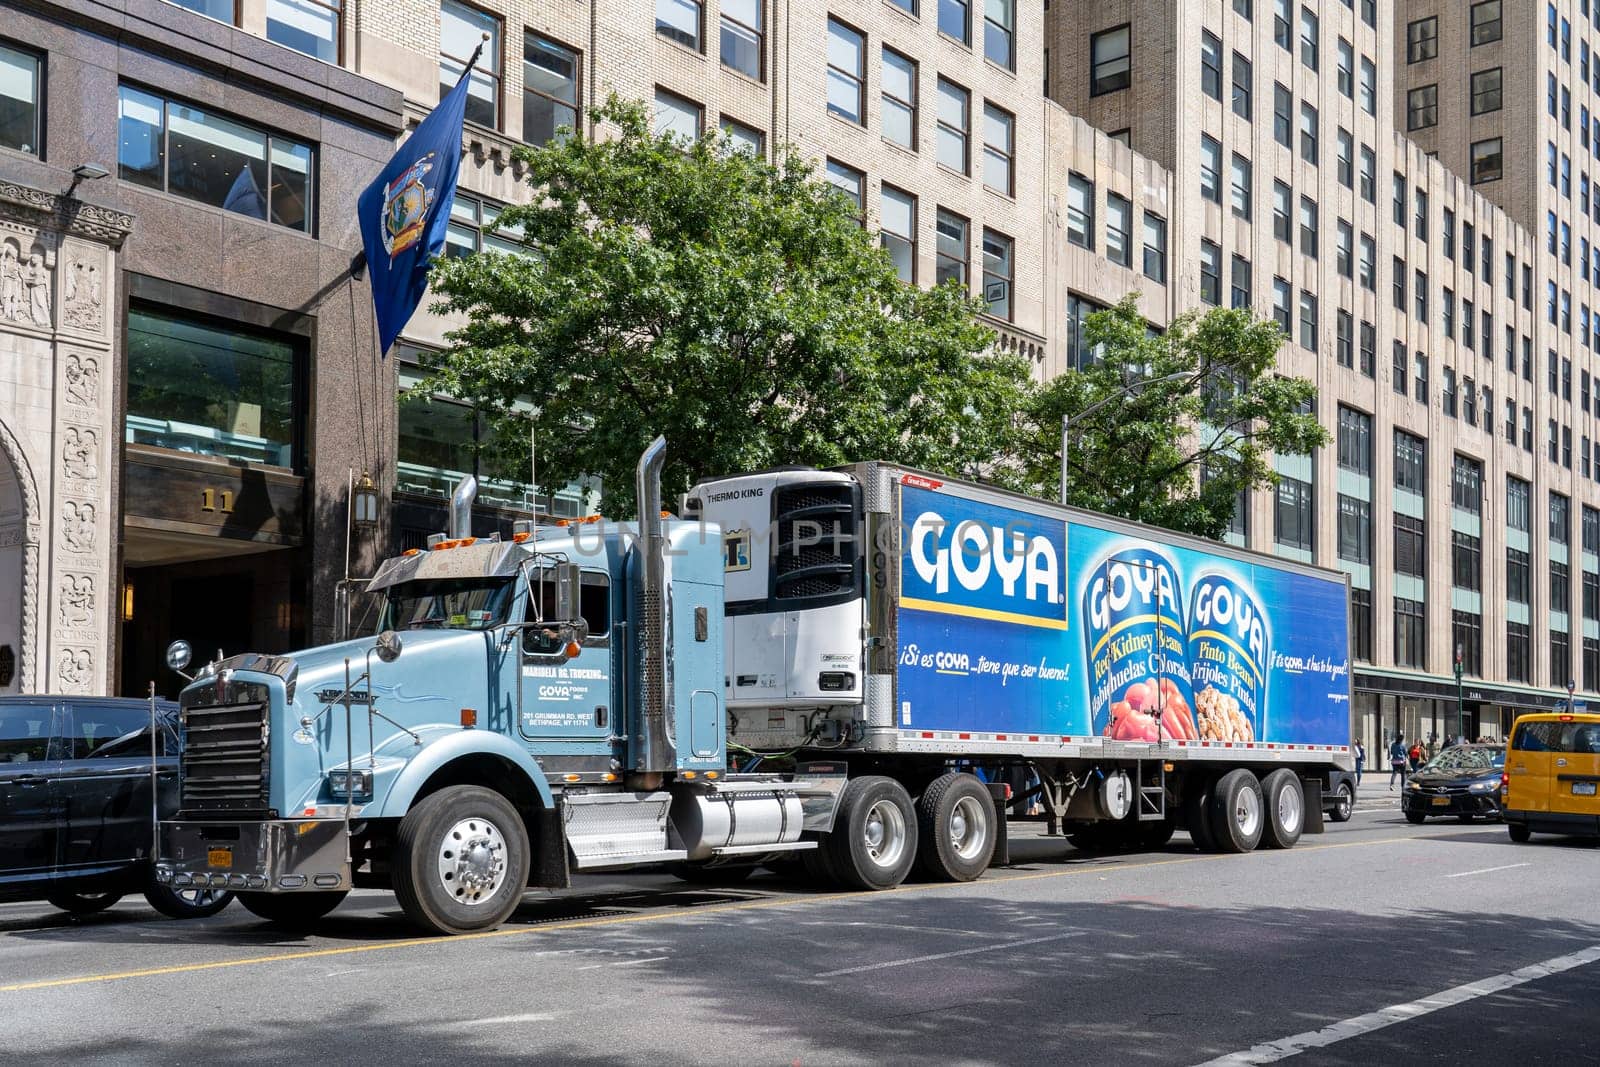 New York City, United States of America - September 20, 2019: A big truck parked in Manhattan.